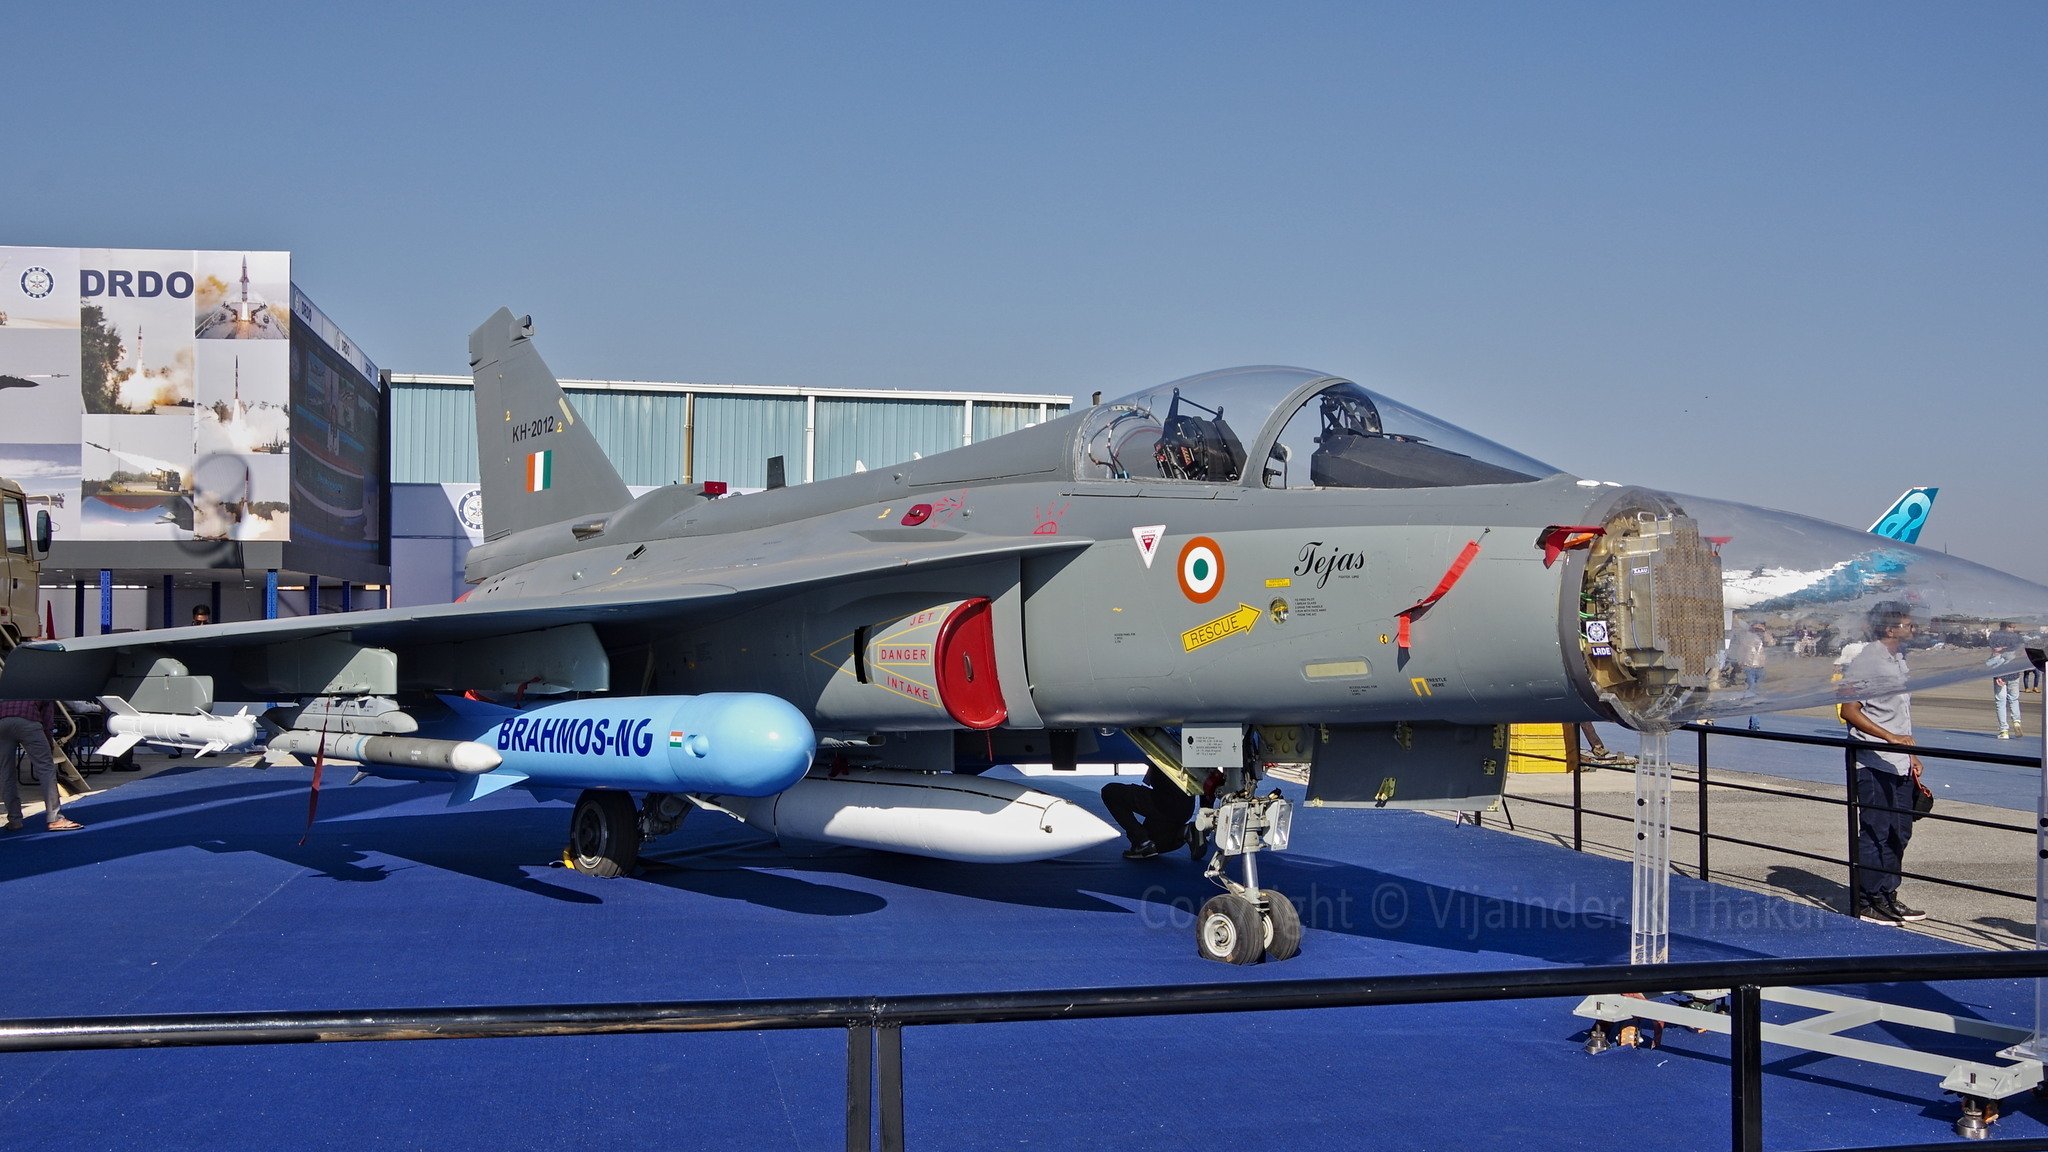 Vijainder K Thakur on Twitter: "Two Brahmos NG supersonic cruise missiles on the innermost wing pylons of the Tejas LSP-2 fitted with the Uttam AESA was the star @DRDO_India display at #AeroIndia2019